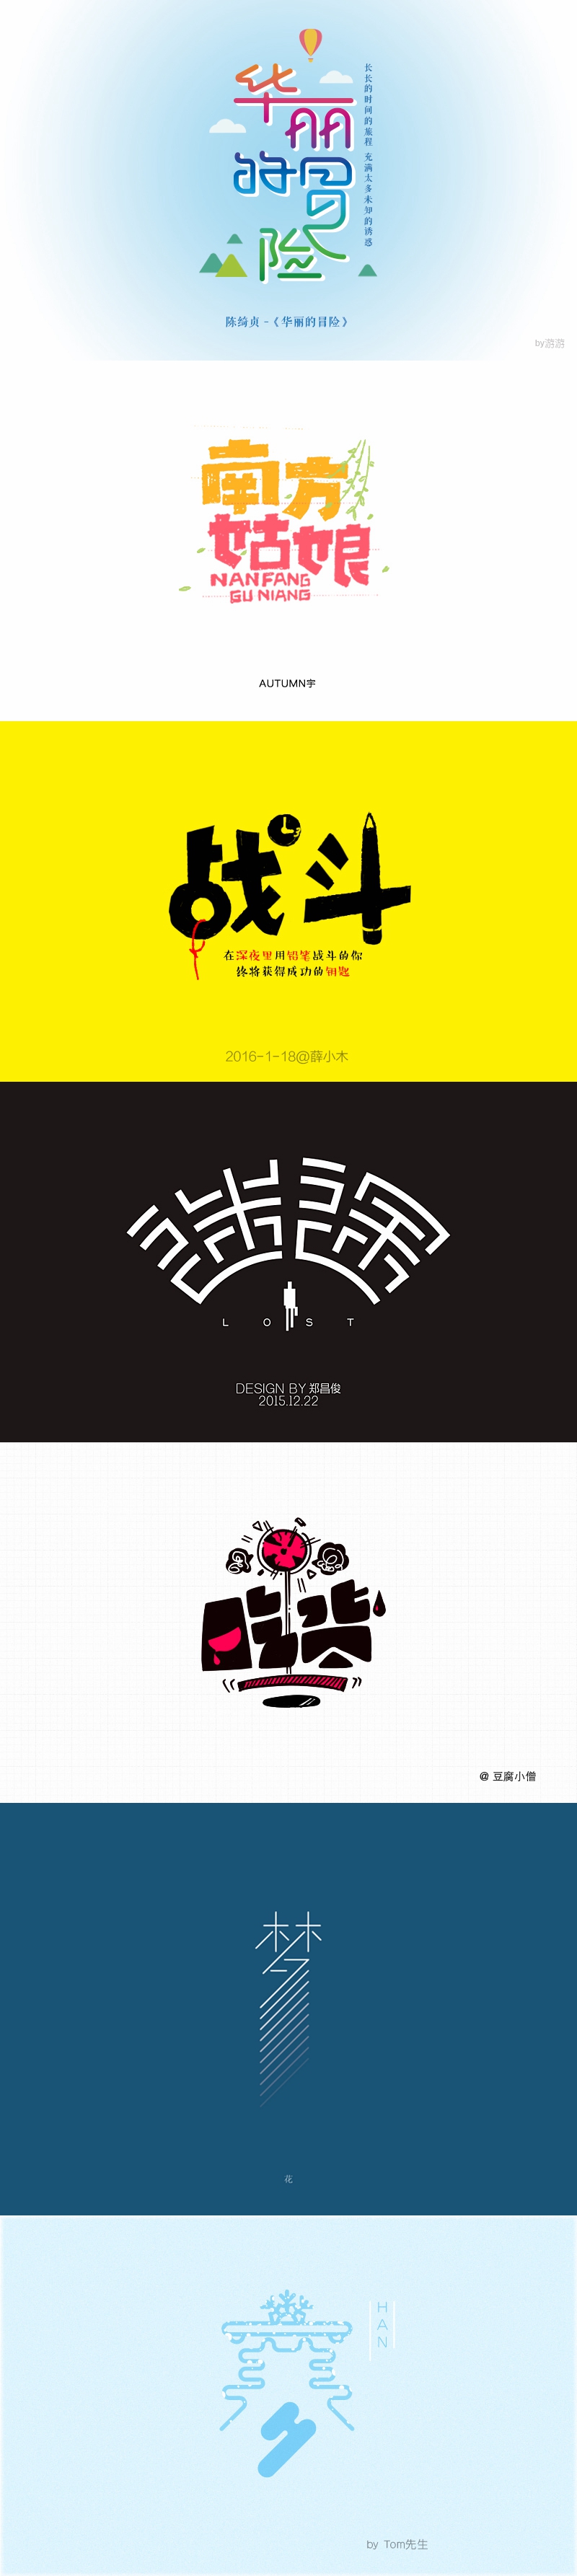 90+ Devious Chinese Font Logo Designs You Should See